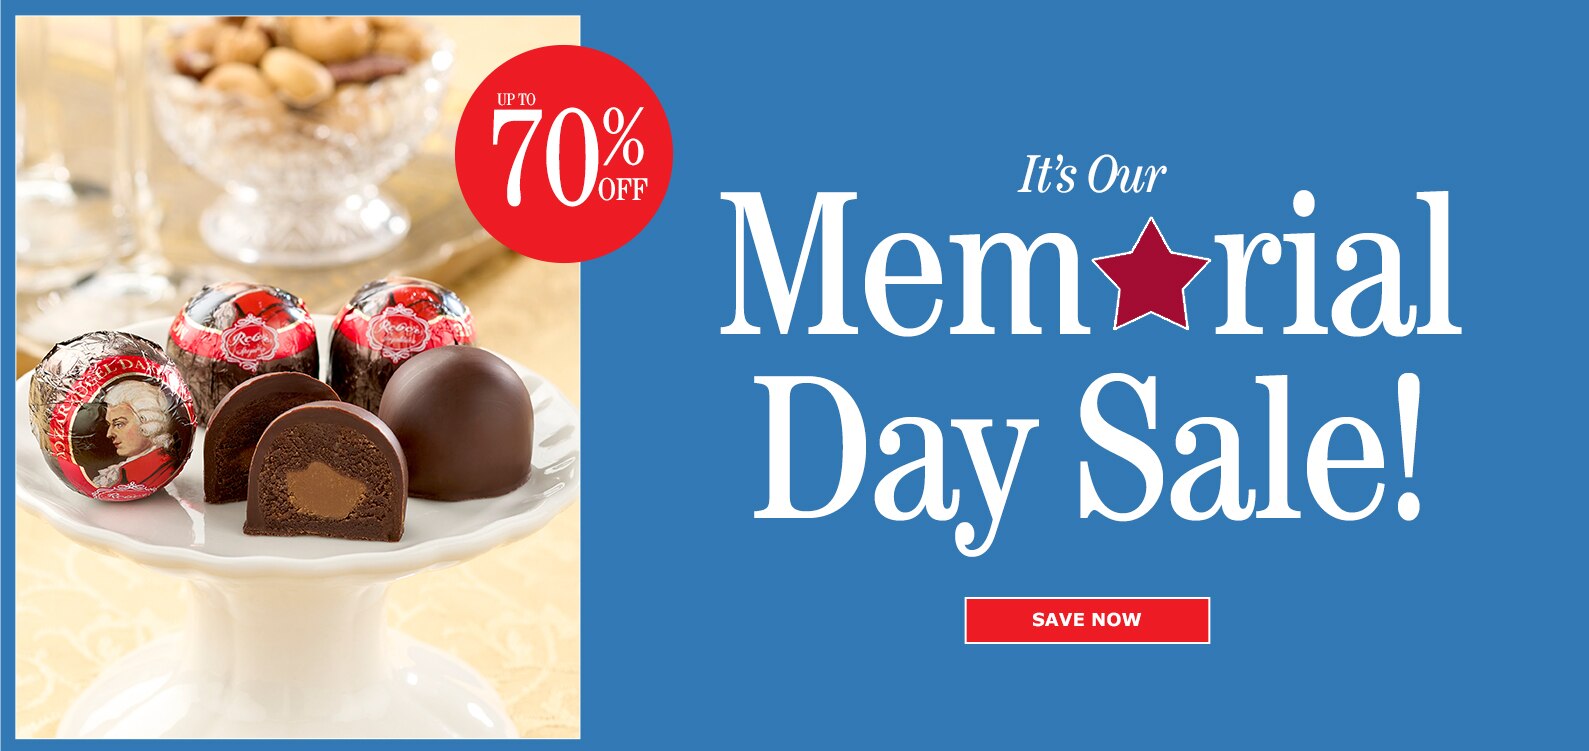 It's Our Memorial Day Sale!, Up to 70% off!